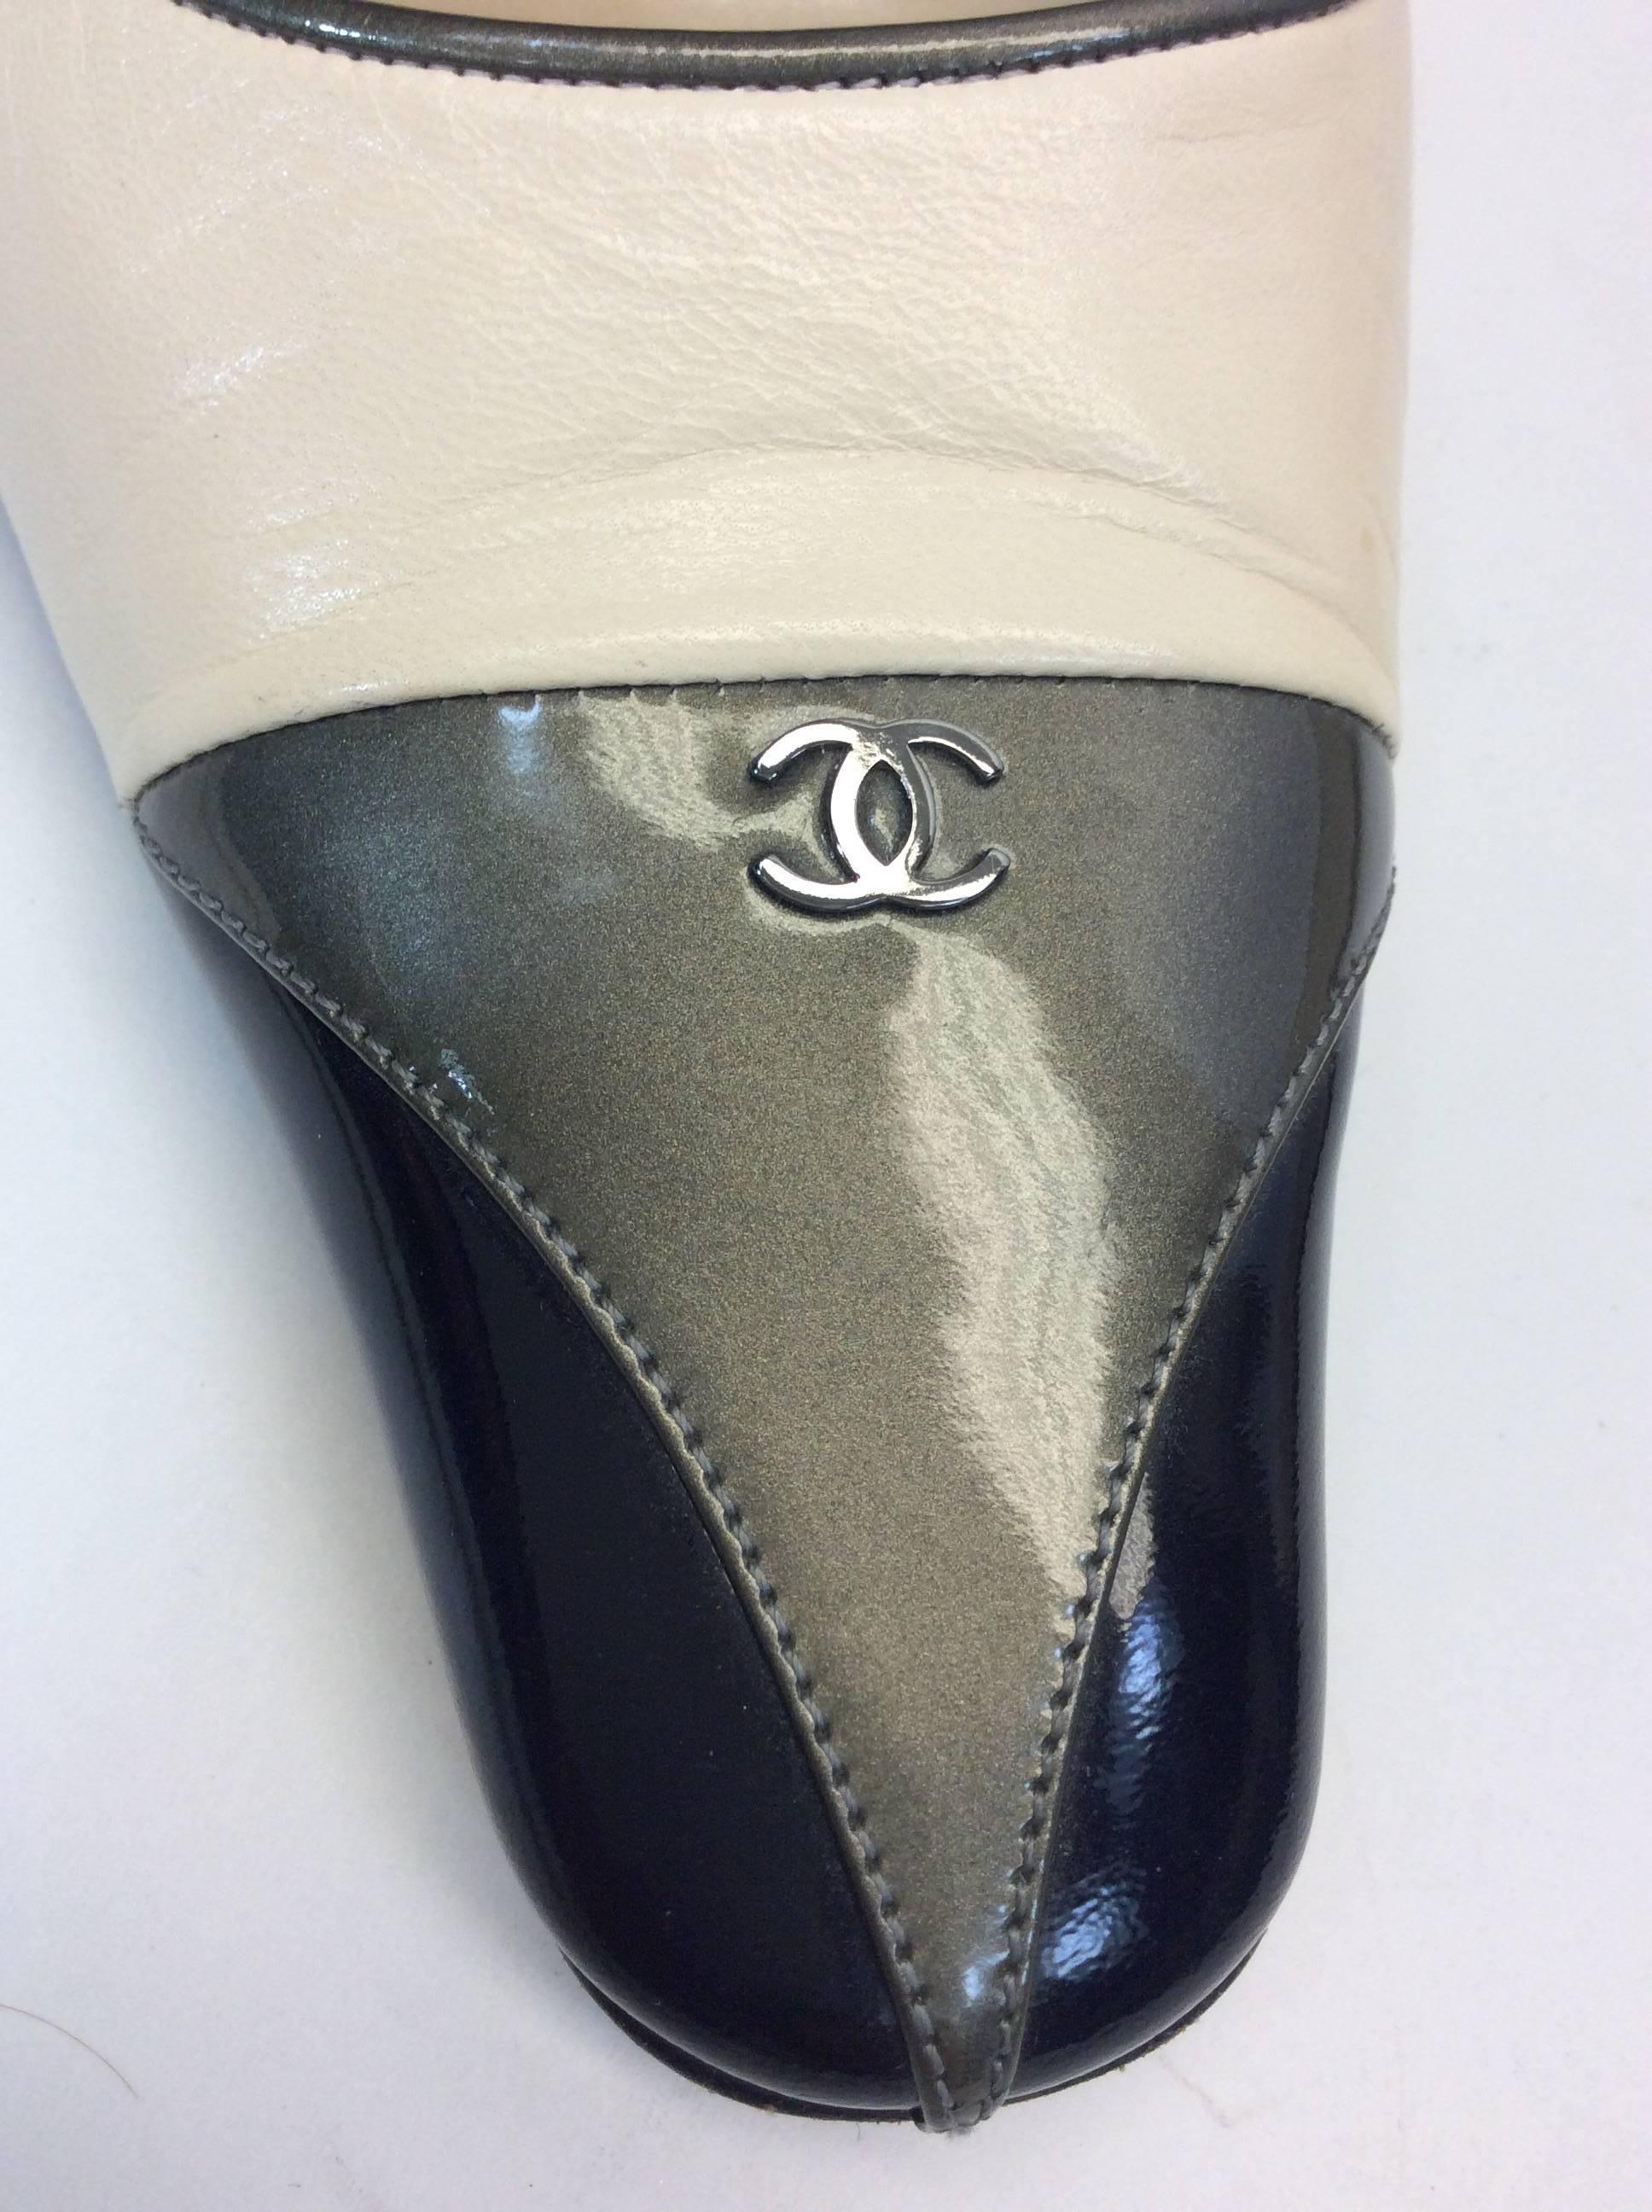 Chanel Tan Leather with Patent Leather Olive/Black Cap Toe Heel  For Sale 2